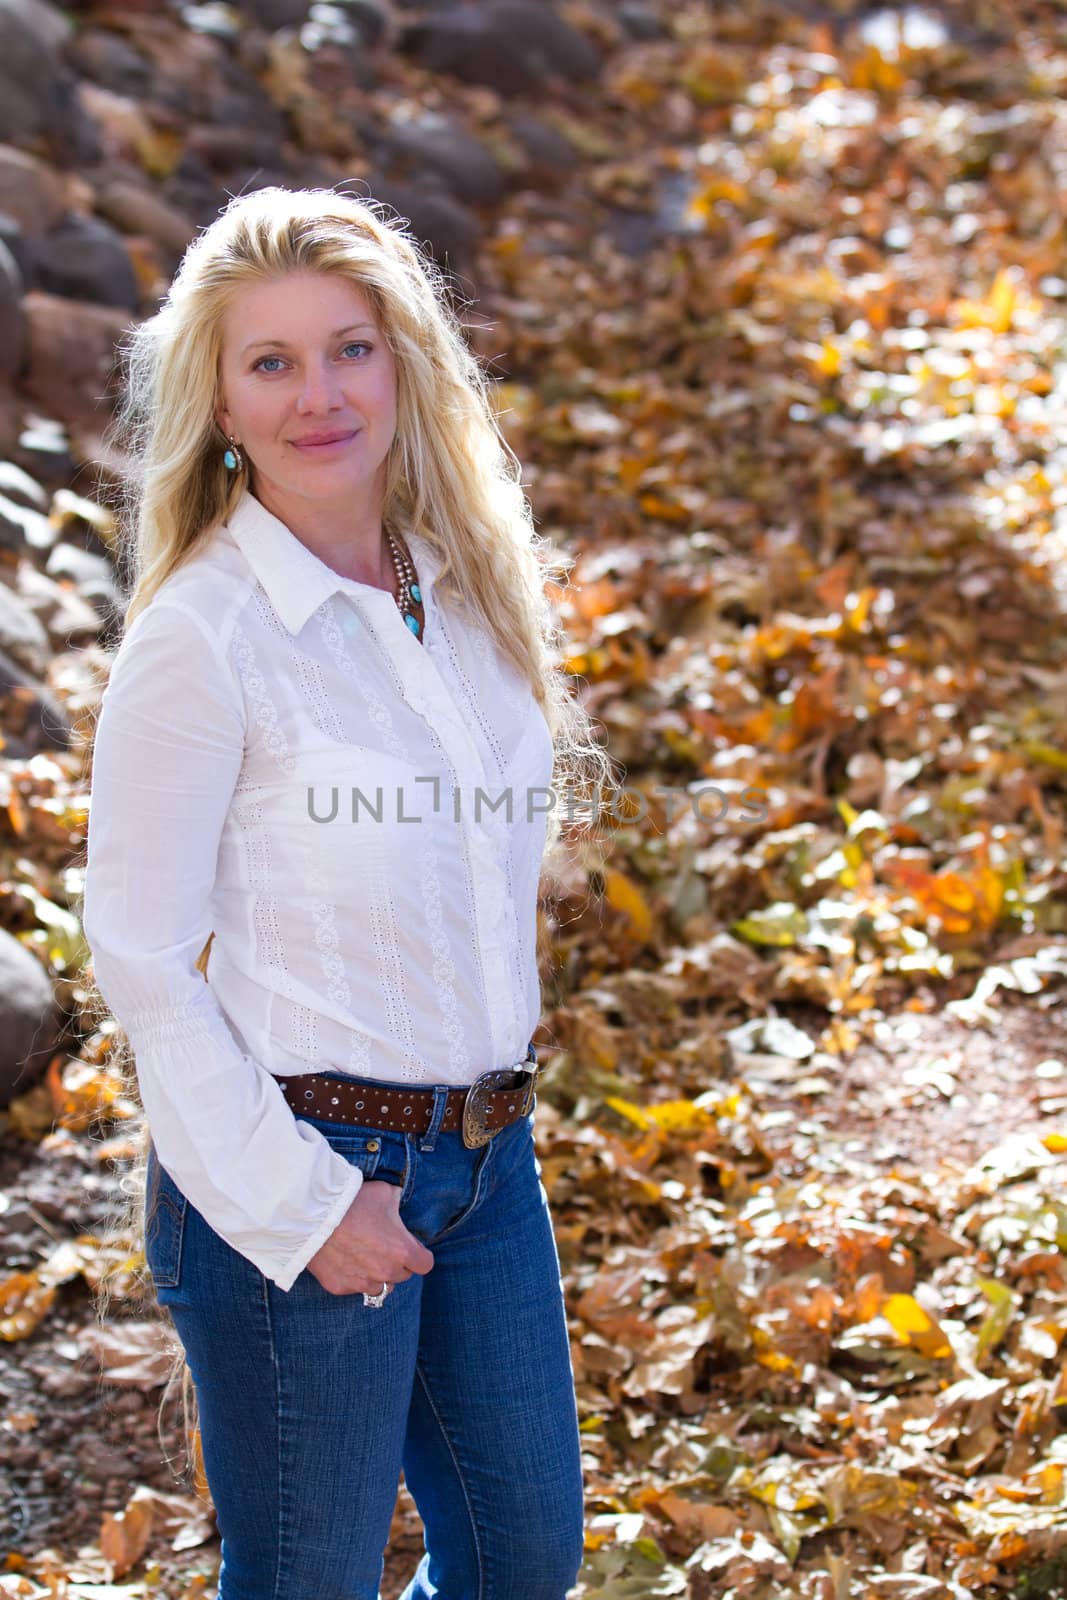 Pretty Woman with Long Hair in fall leaves